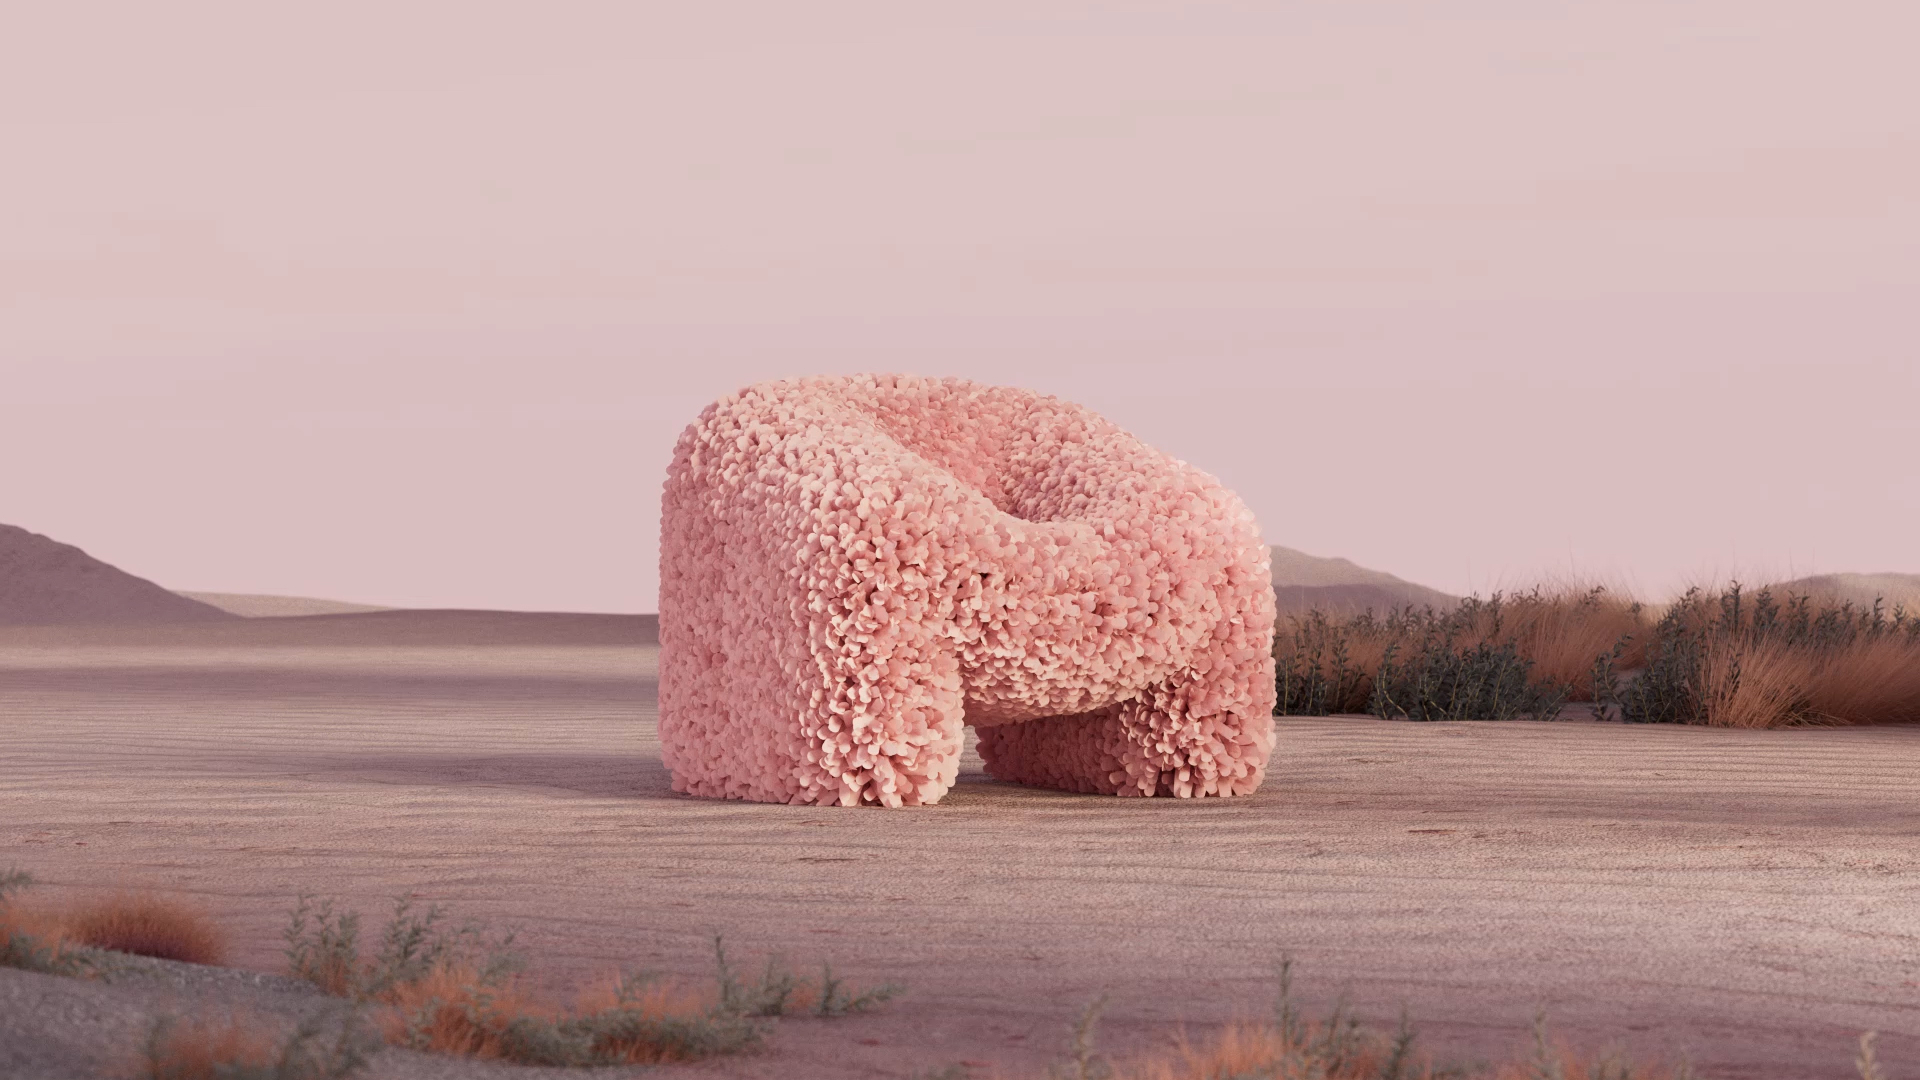 The “Hortensia Chair” is standing in an virtual landscape.